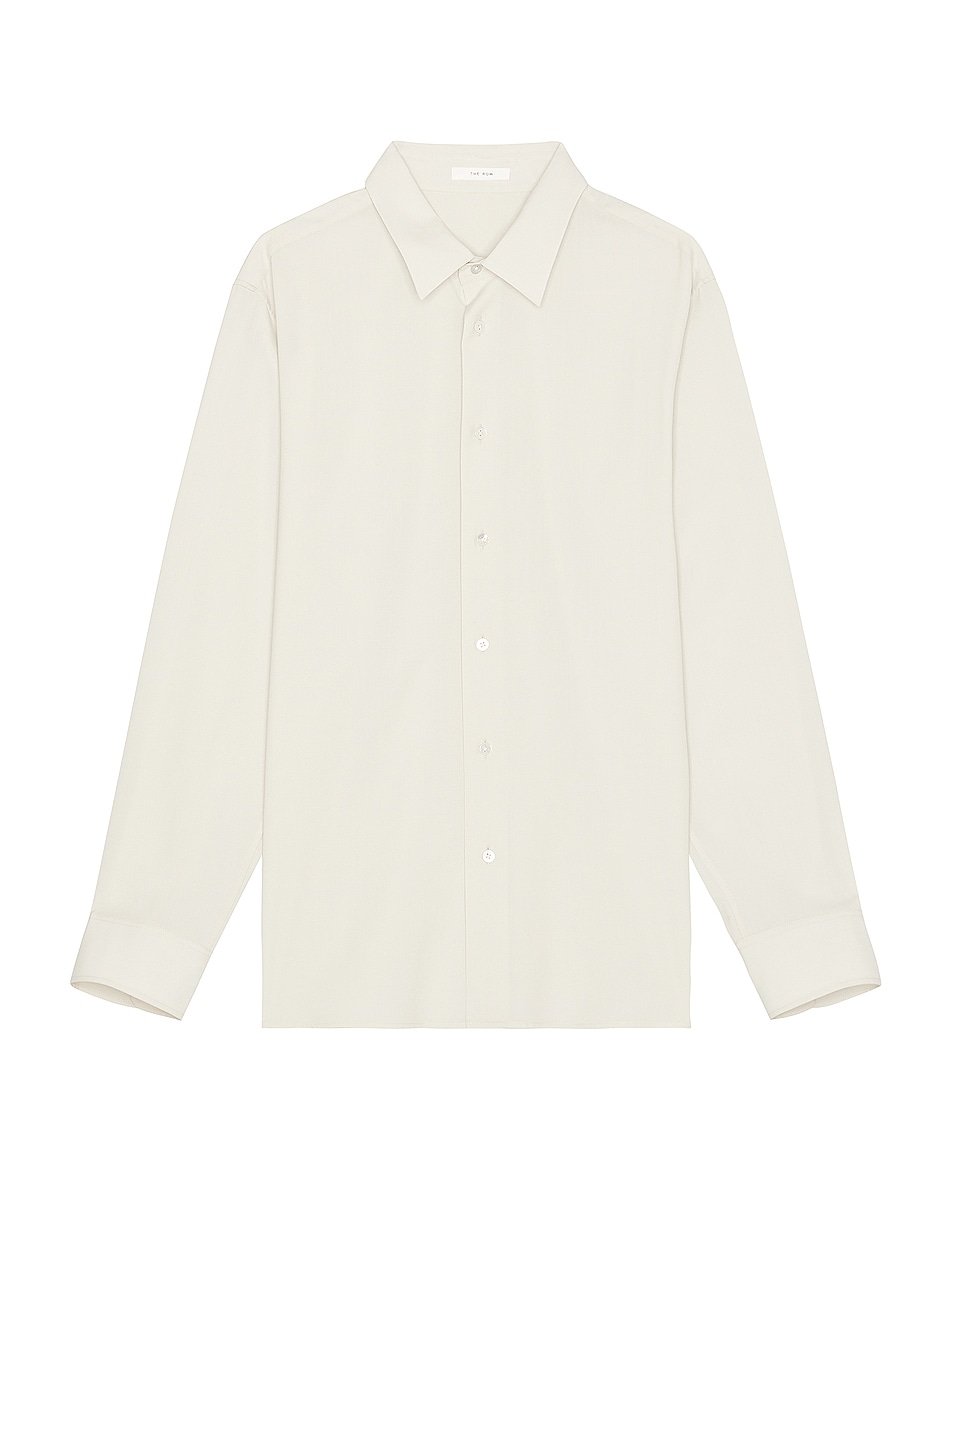 Image 1 of The Row Julio Shirt in Alabaster